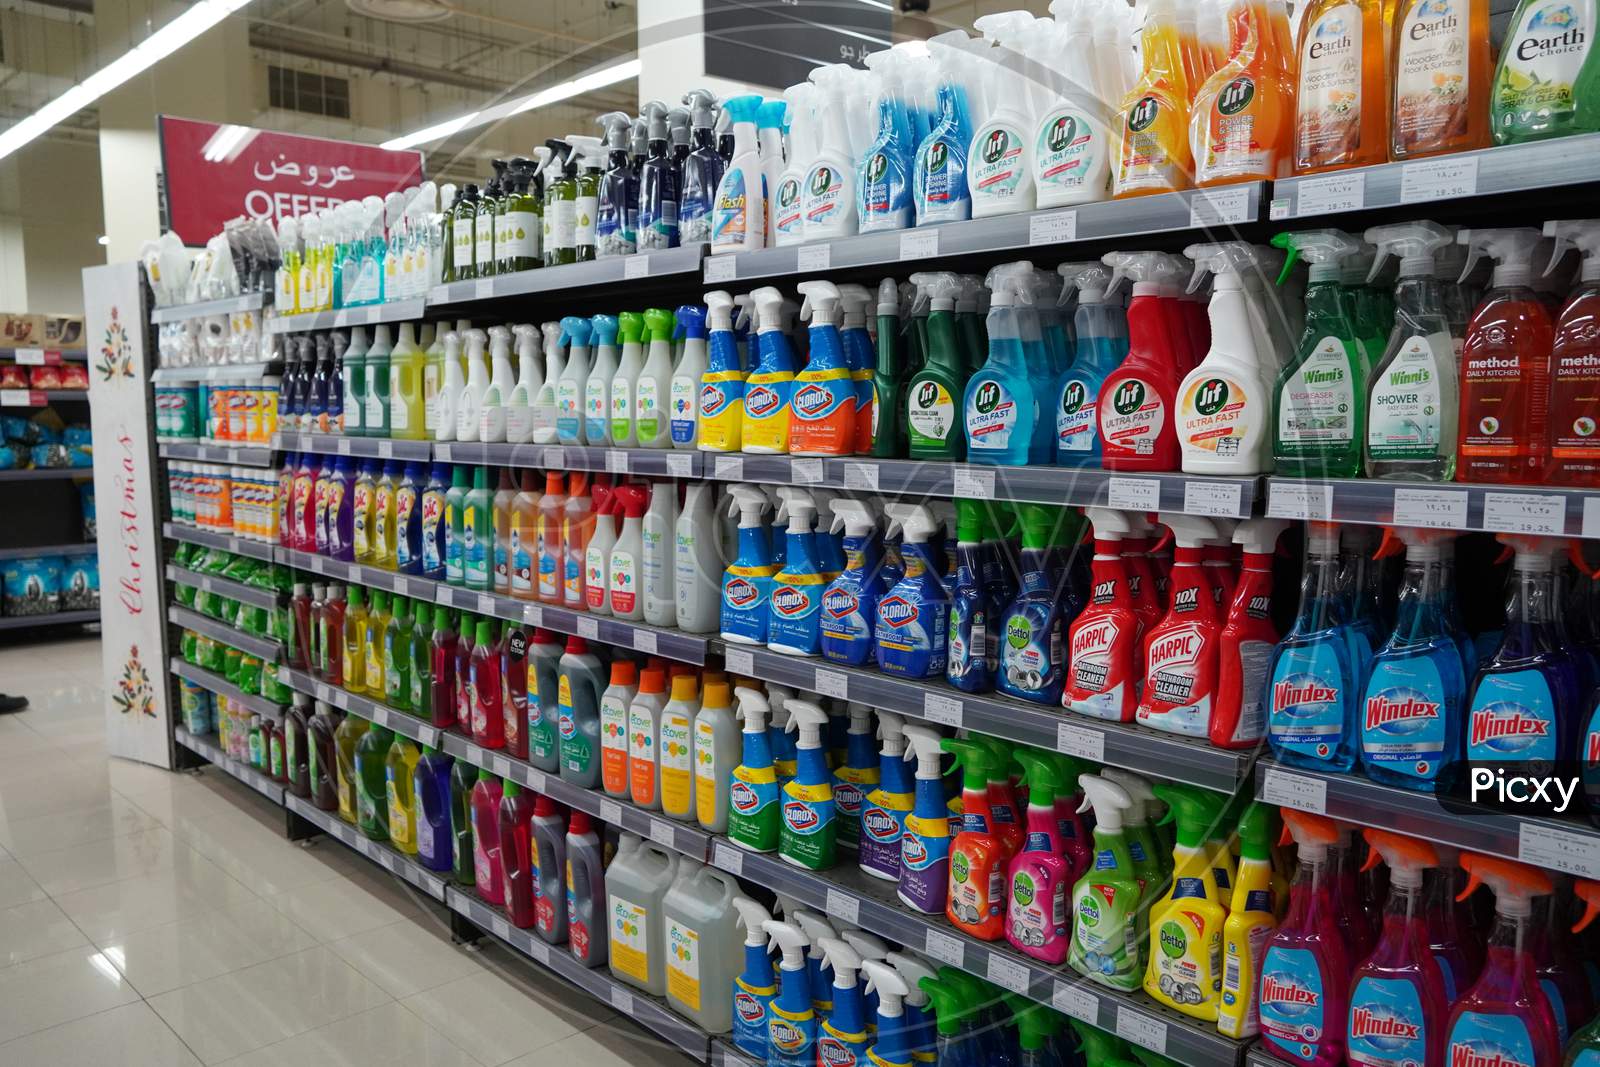 Cleaning Supplies, Sprays, Liquids Cleaning Detergents For Sale On Supermarket Stand. Bottles With Cleaning Products For Cleaning House Of Various Manufacturers On Shelves. - Dubai Uae December 2019